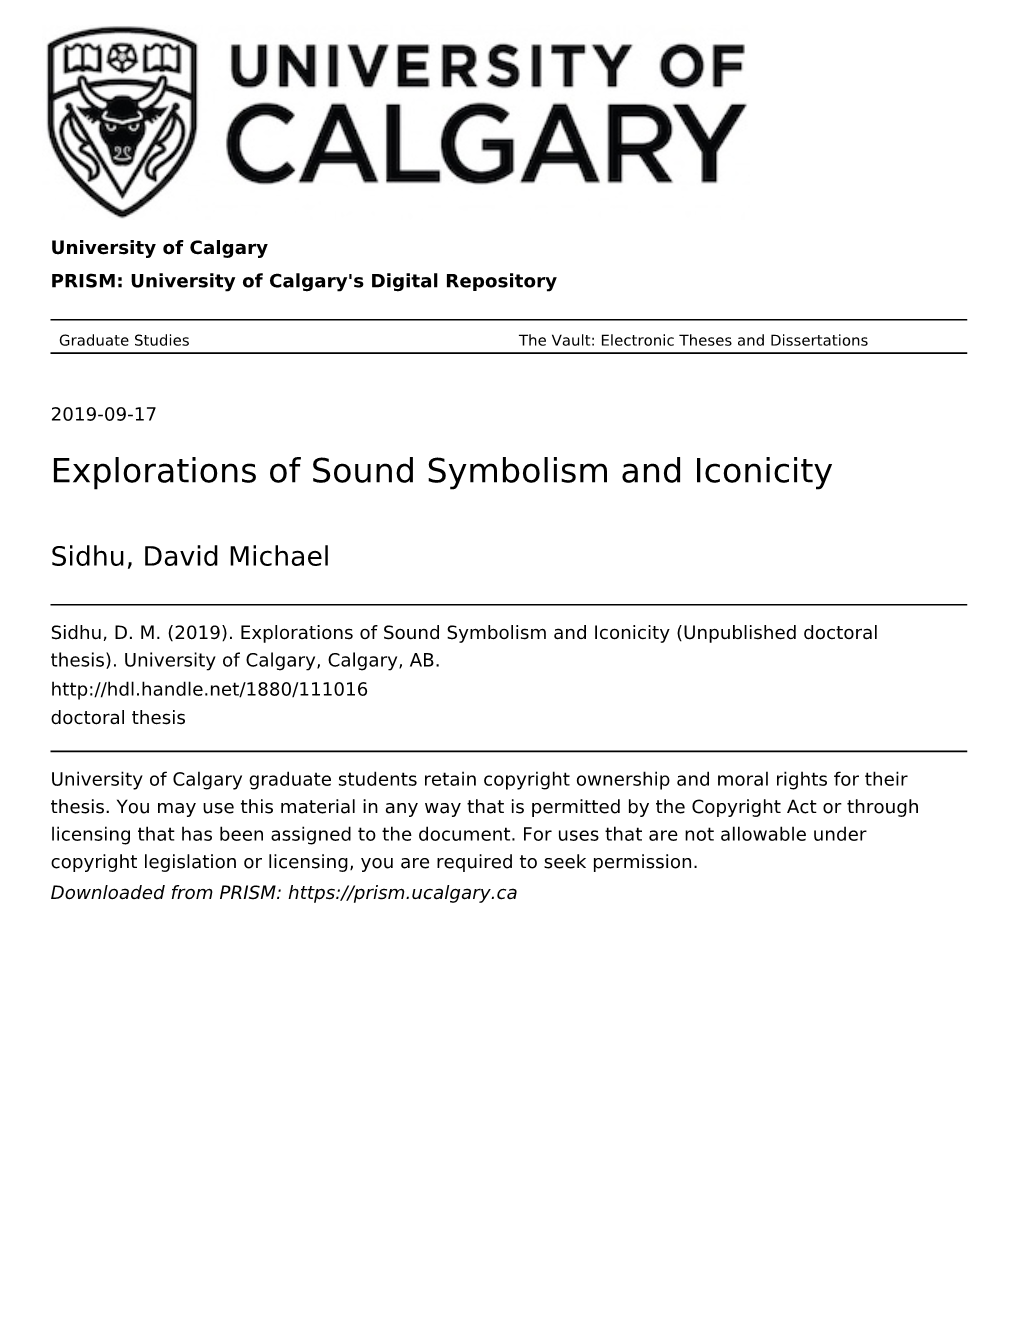 Explorations of Sound Symbolism and Iconicity